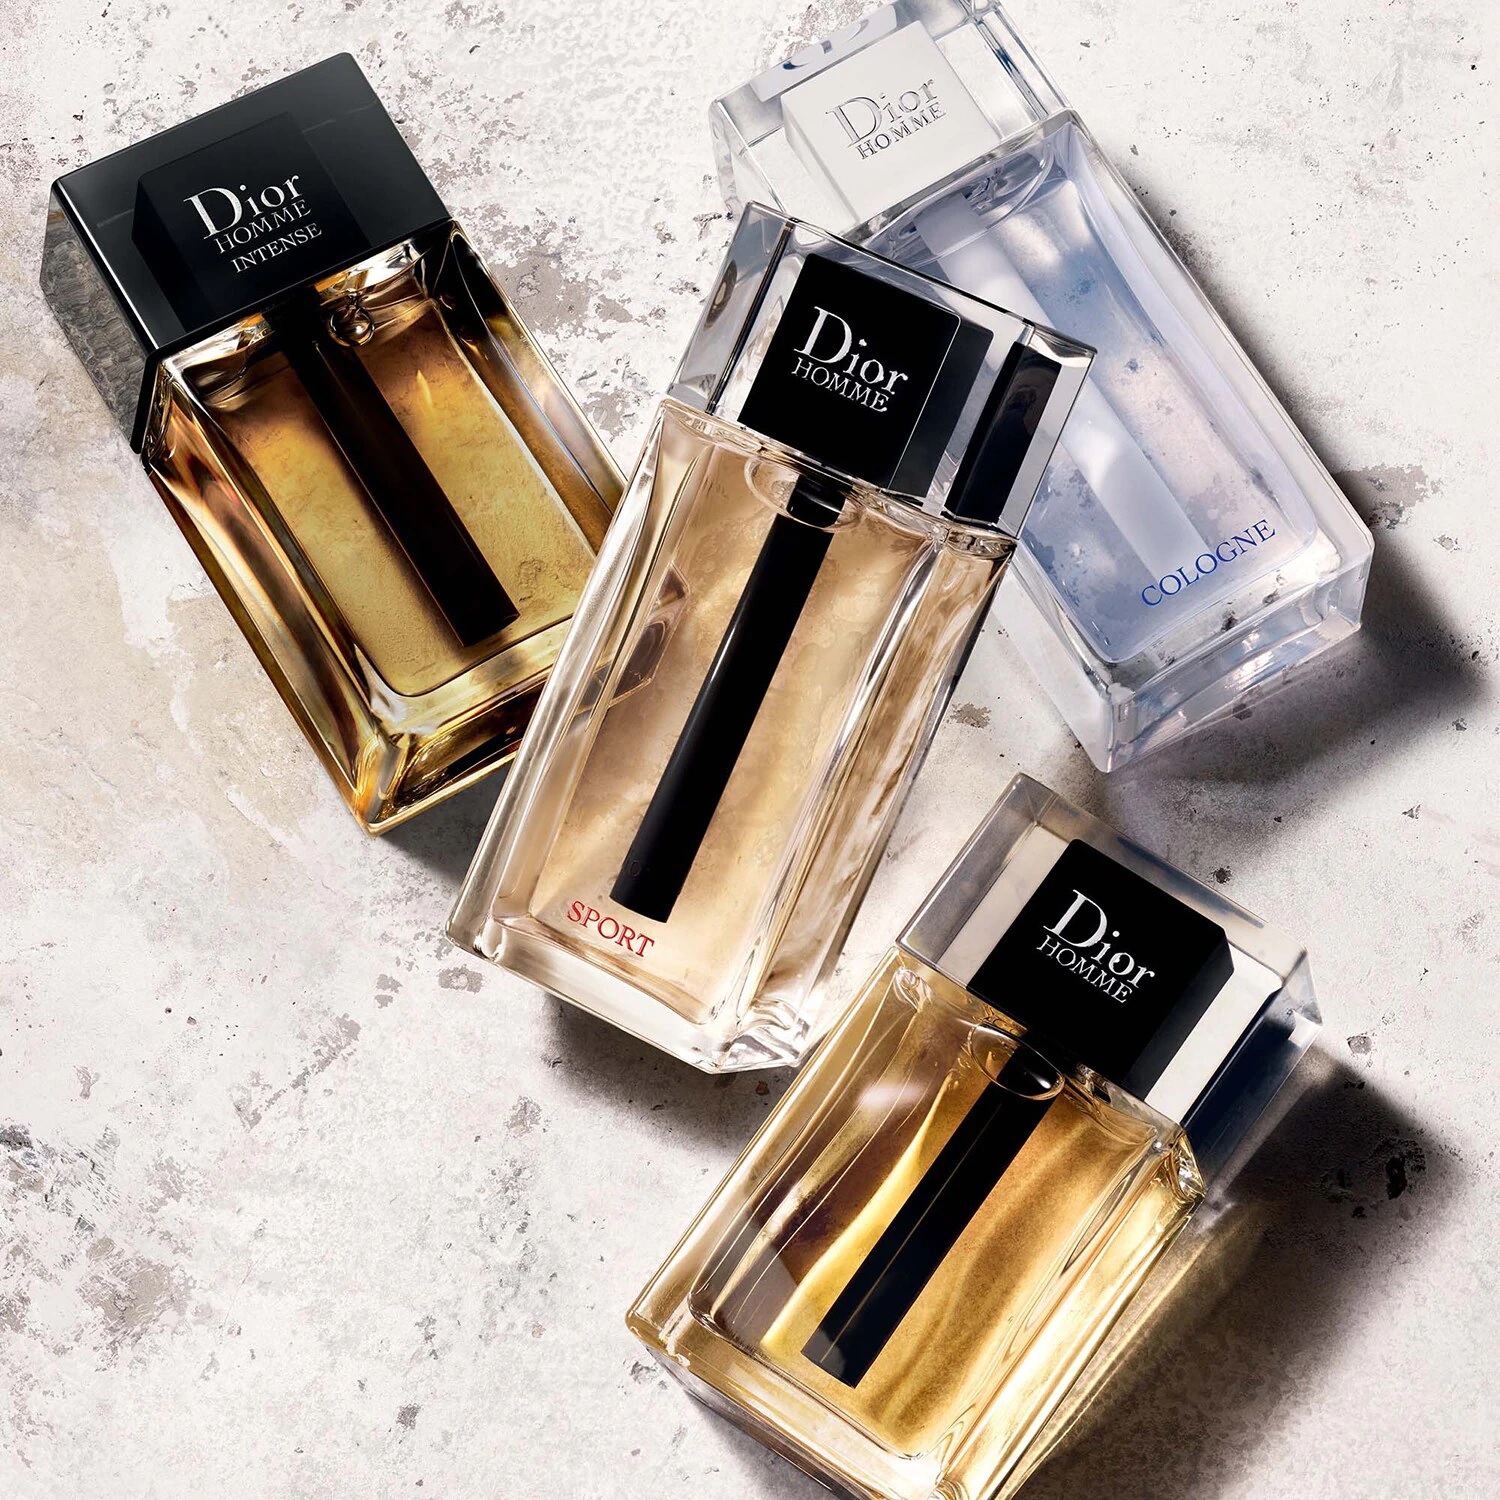 perfume shazam on Twitter retroc0de Dior homme intense This classic  from Christian dior is currently retailing for N42000 for 100ml edp  One  of the best offers anywhere httpstcoUit06NZtqy  Twitter